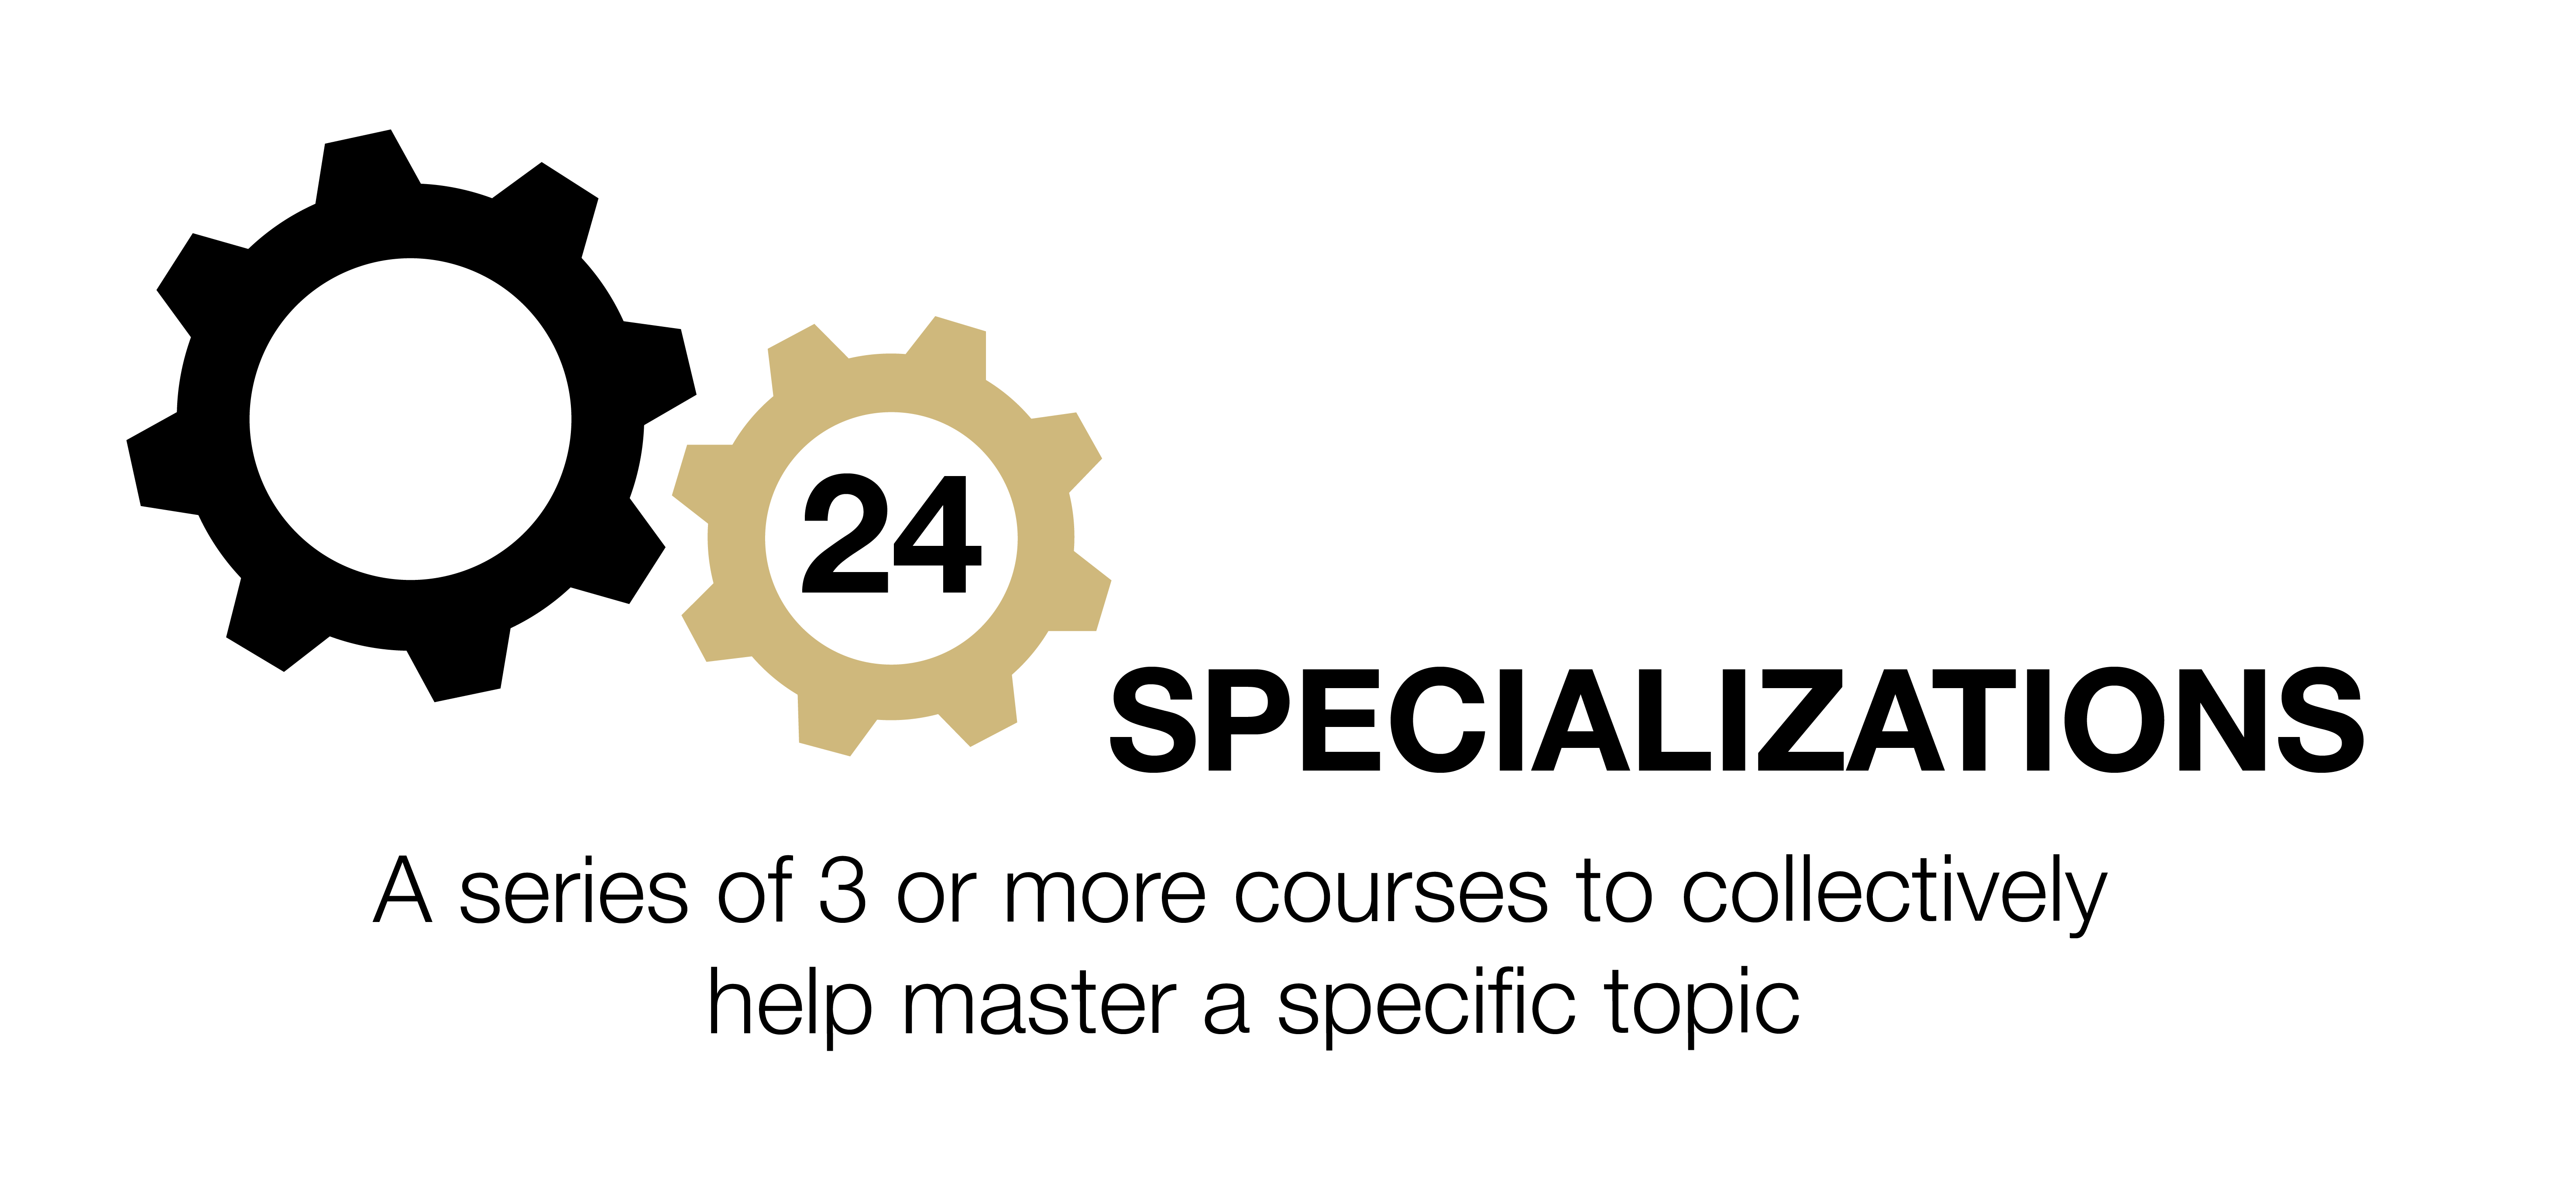 MOOCs has 24 Specializations. A specialization is a series of 3 or more courses used to collectively help master a specific topic.